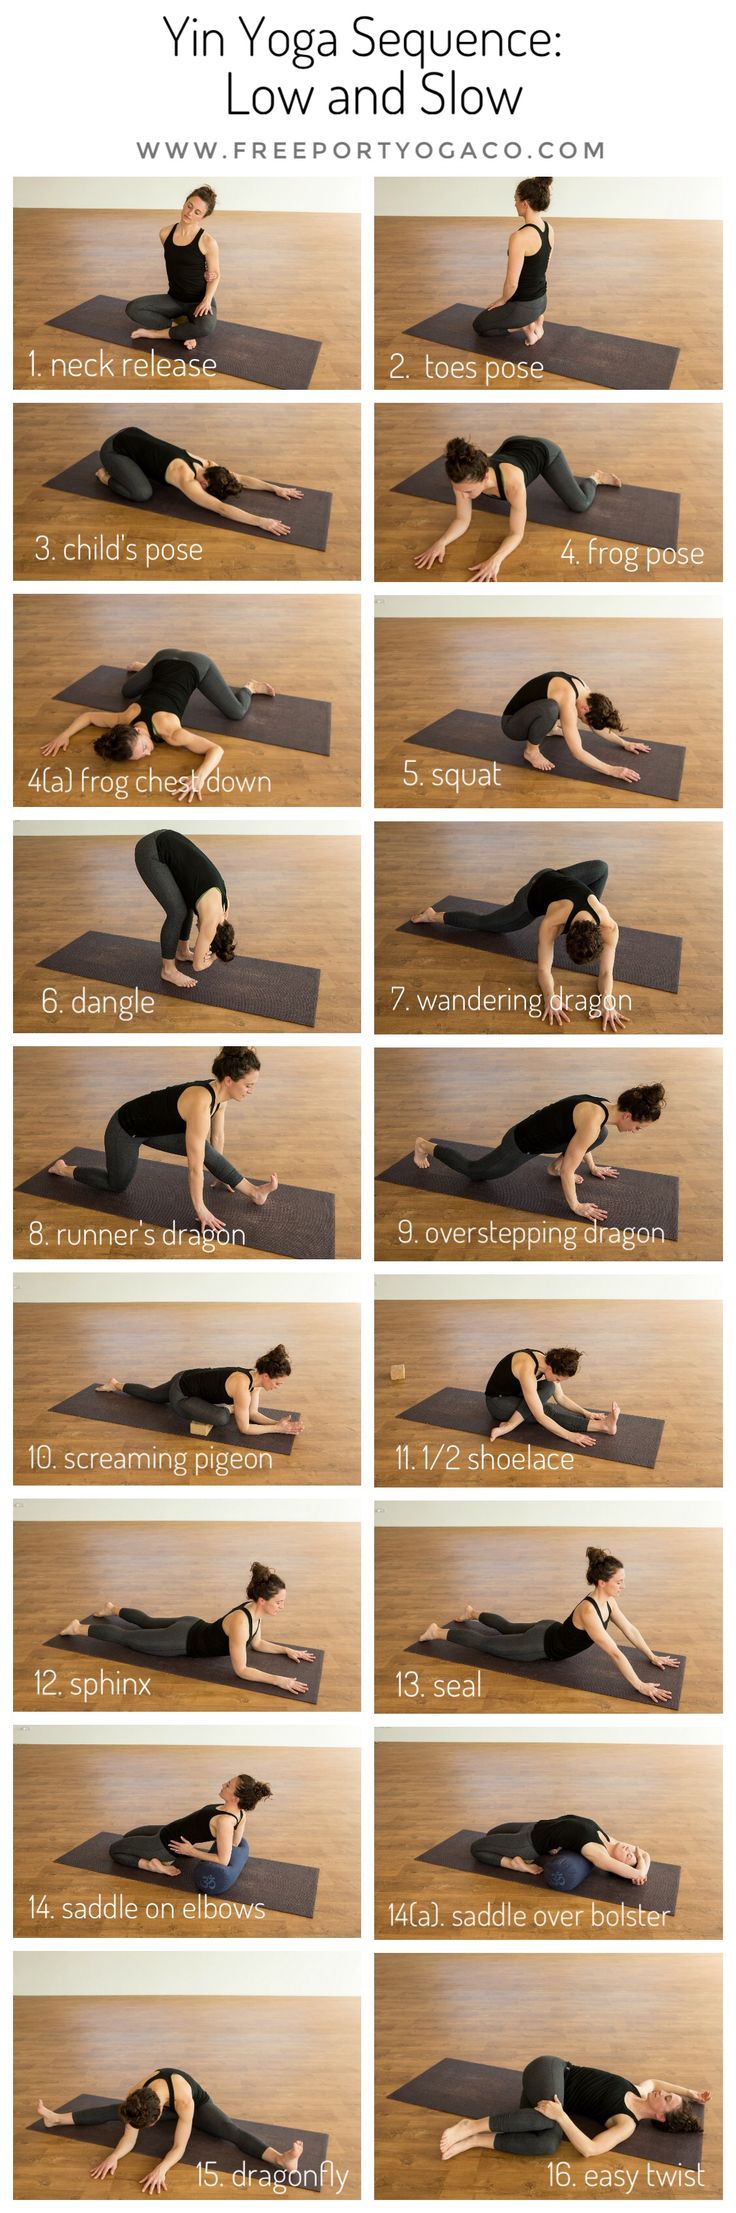 This month’s Yin Yoga Sequence is aptly titled “Low and Slow”, inviting an...